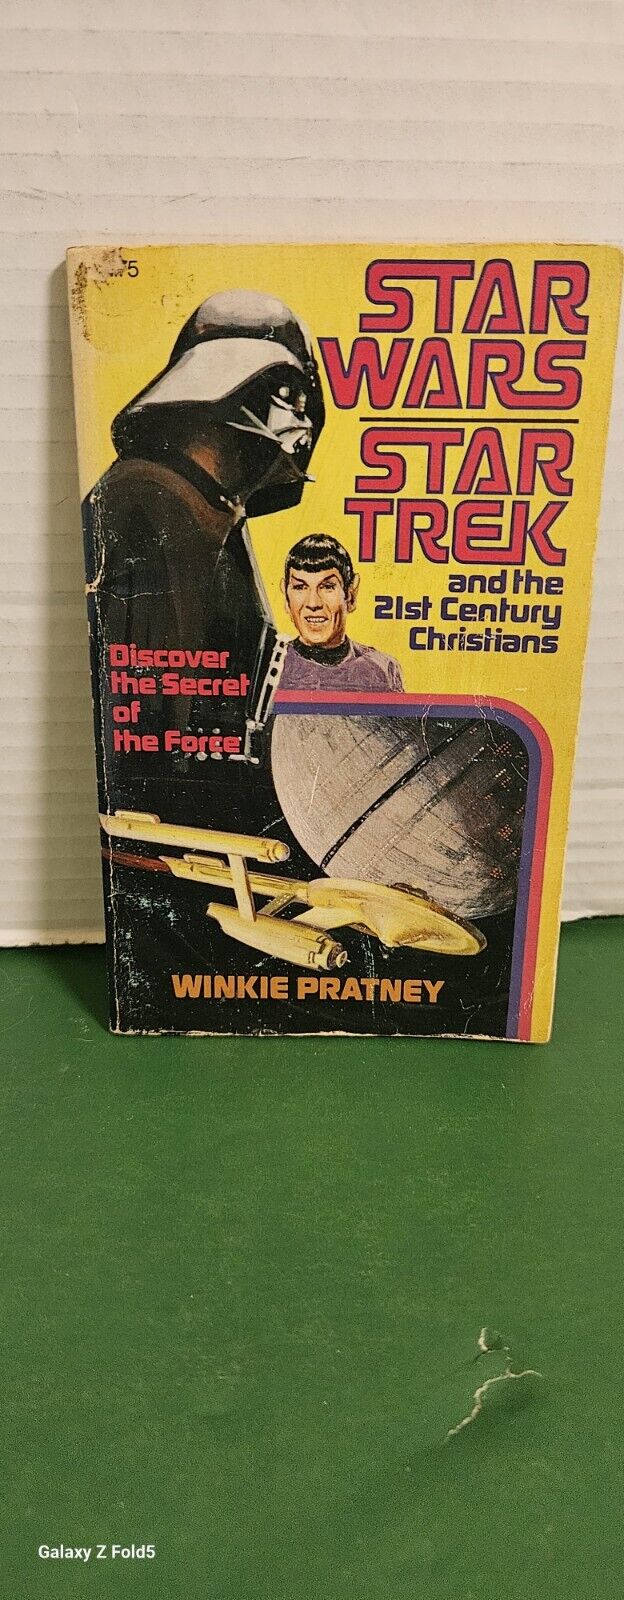 Vintage Star Wars,Star Trek And The 21st Century Christian's Paperback Great...